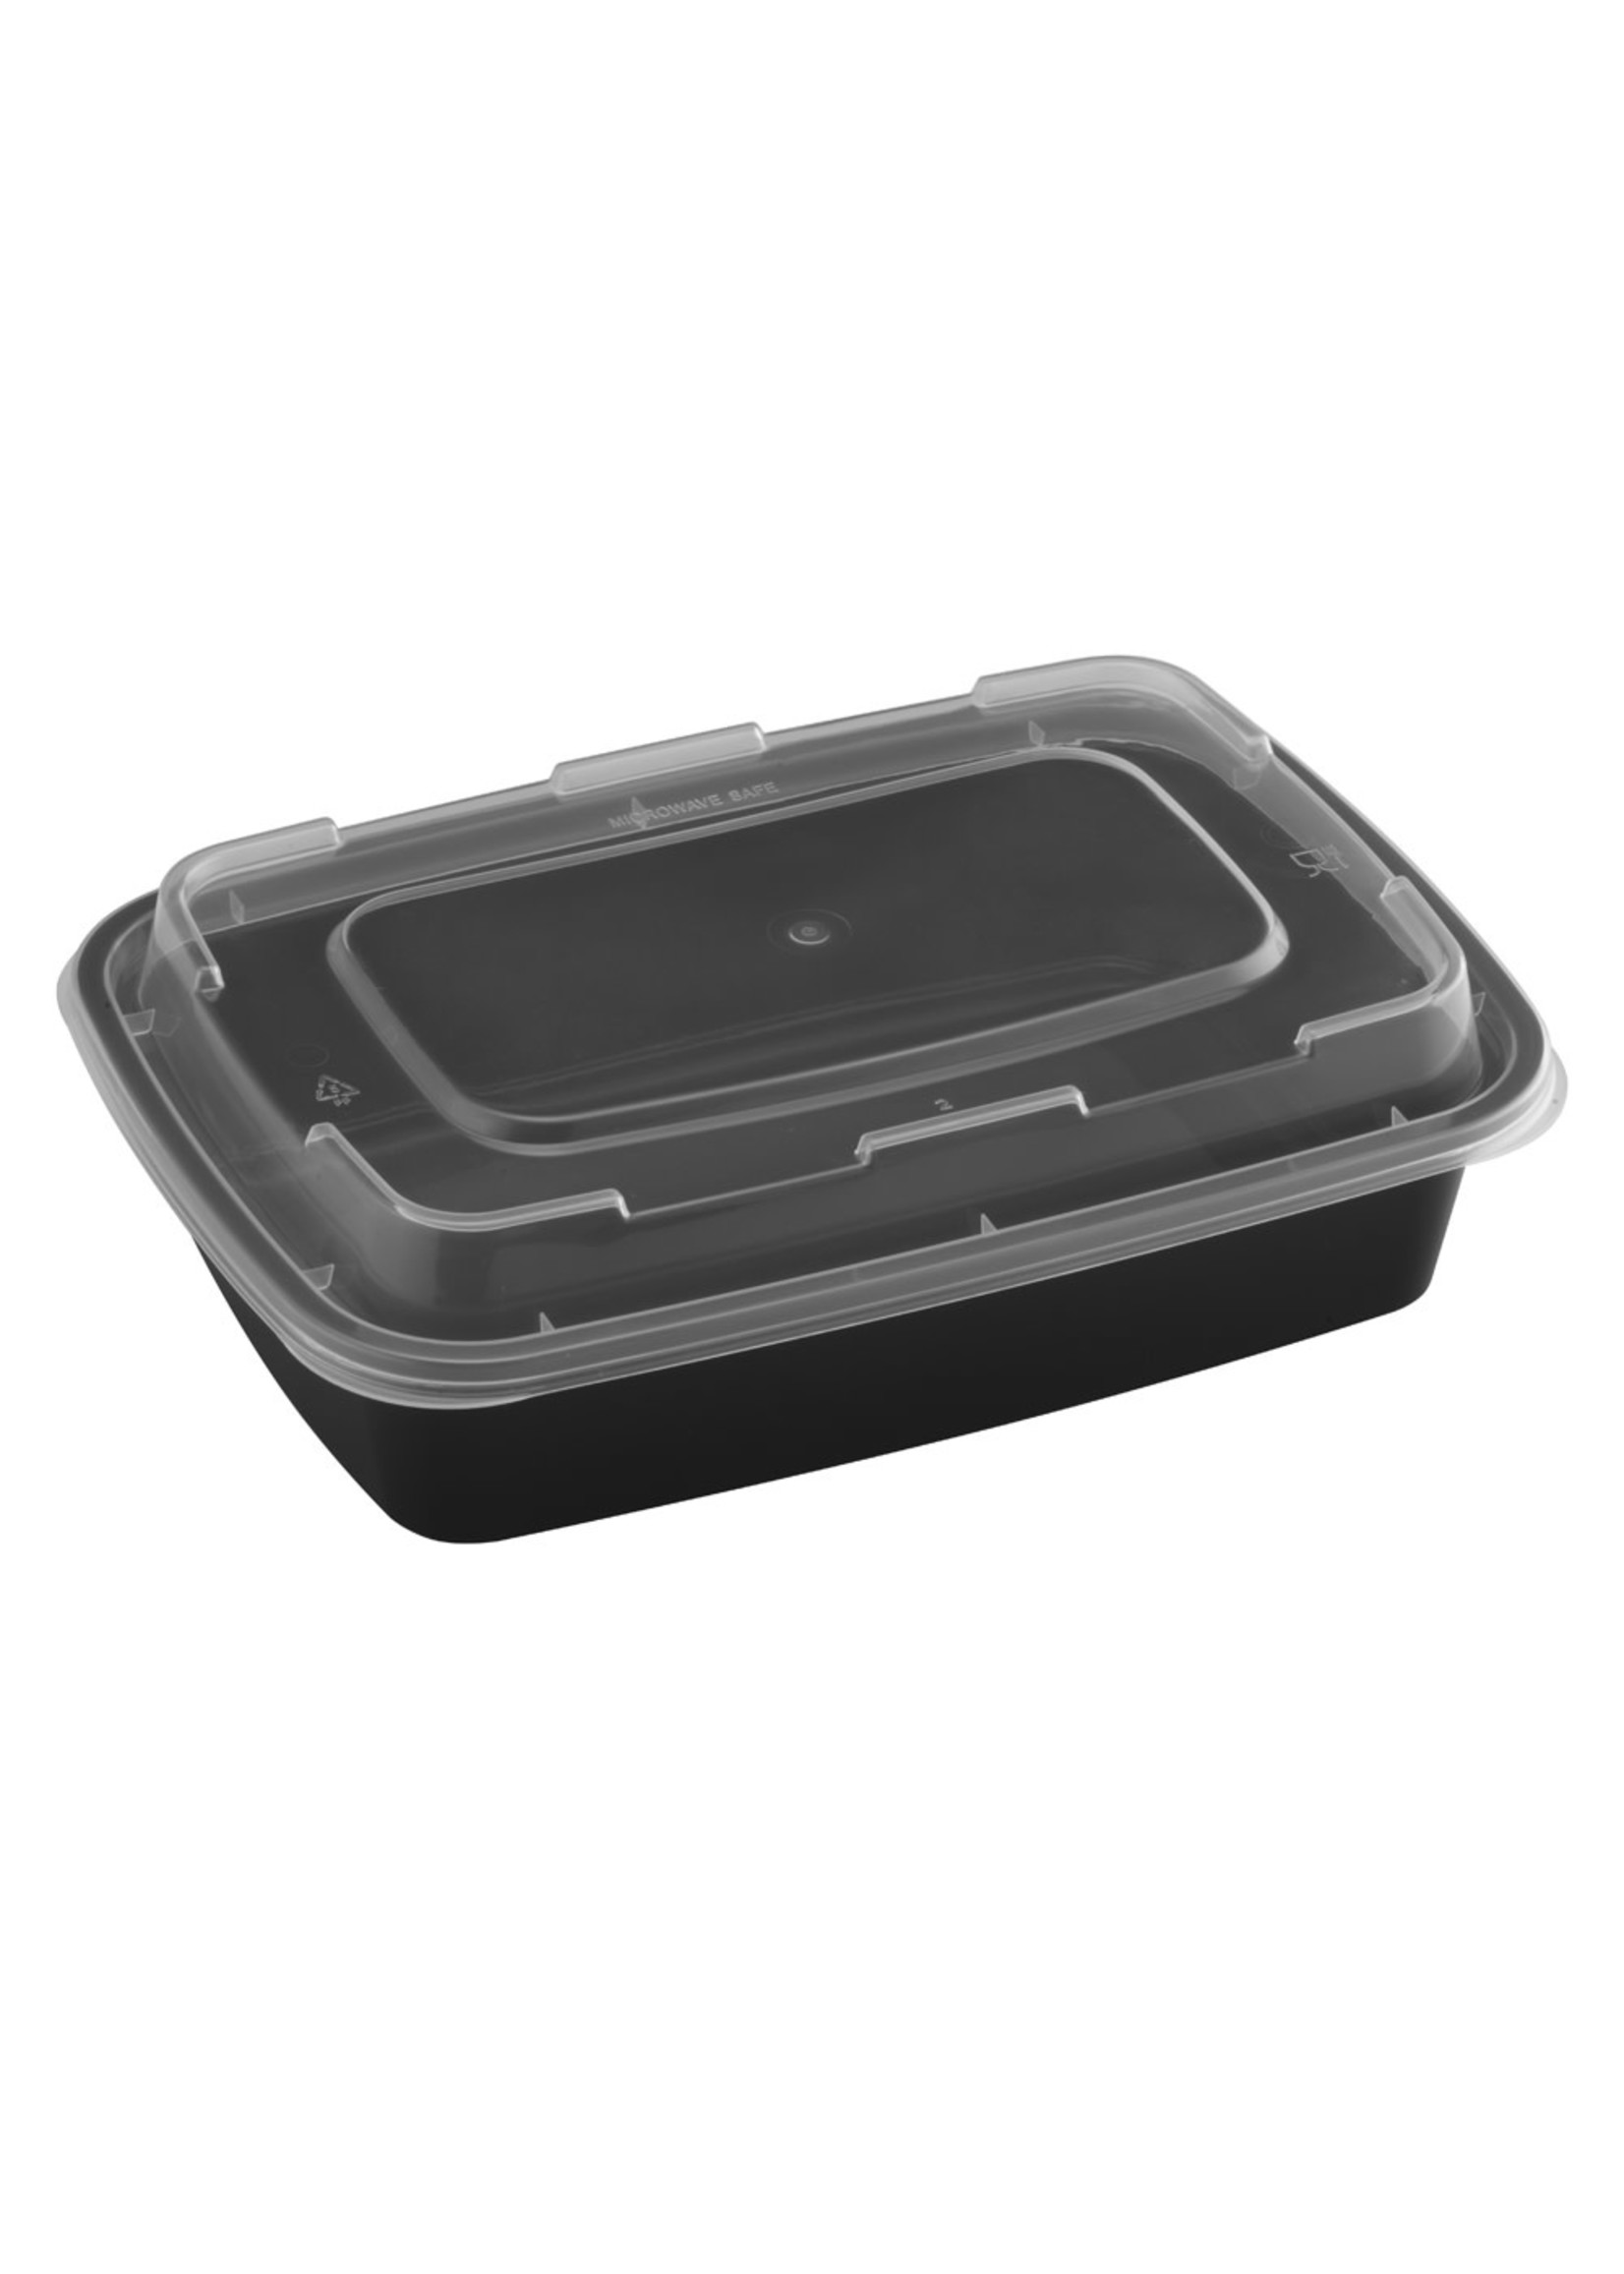 Tiya, Inc. TY-24 - 24oz Rectangular Microwavable Container with Lid, 150 sets (50/6)